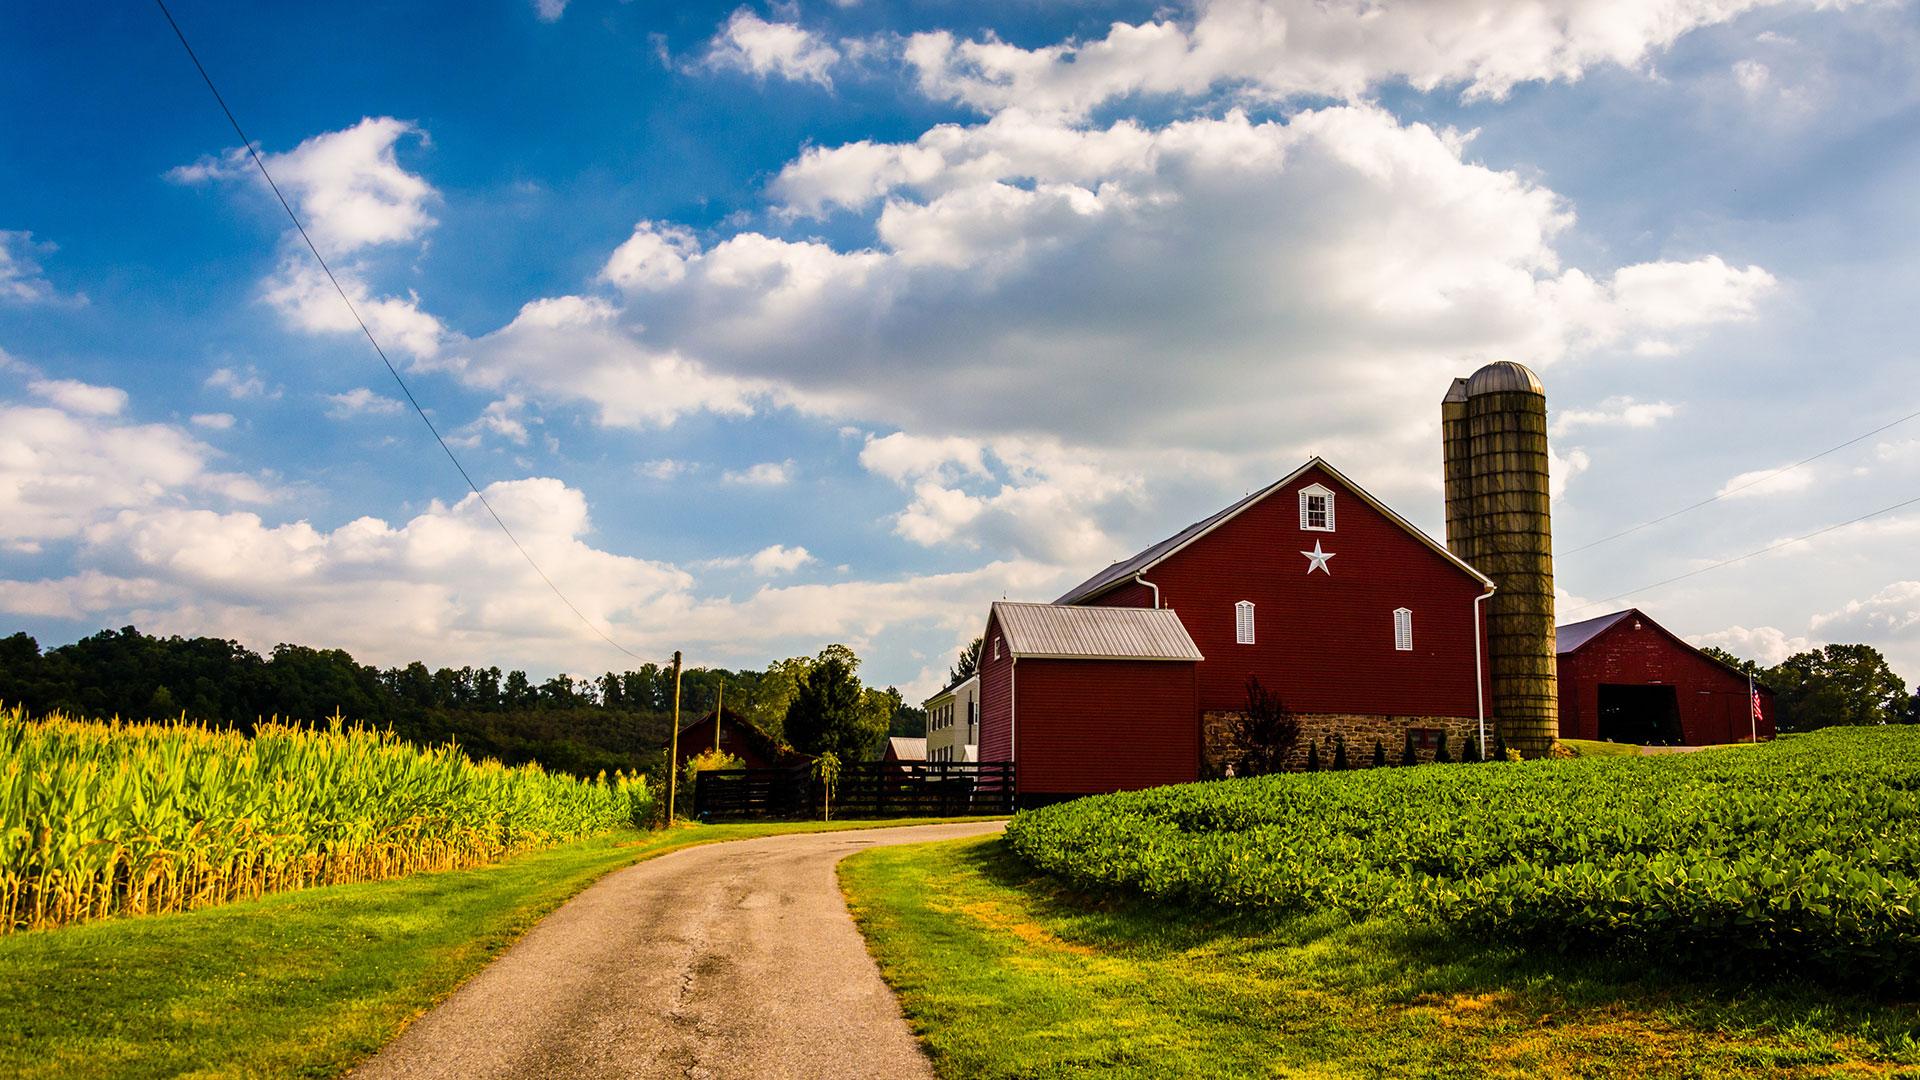 Driveway and red barn, silo and crop field